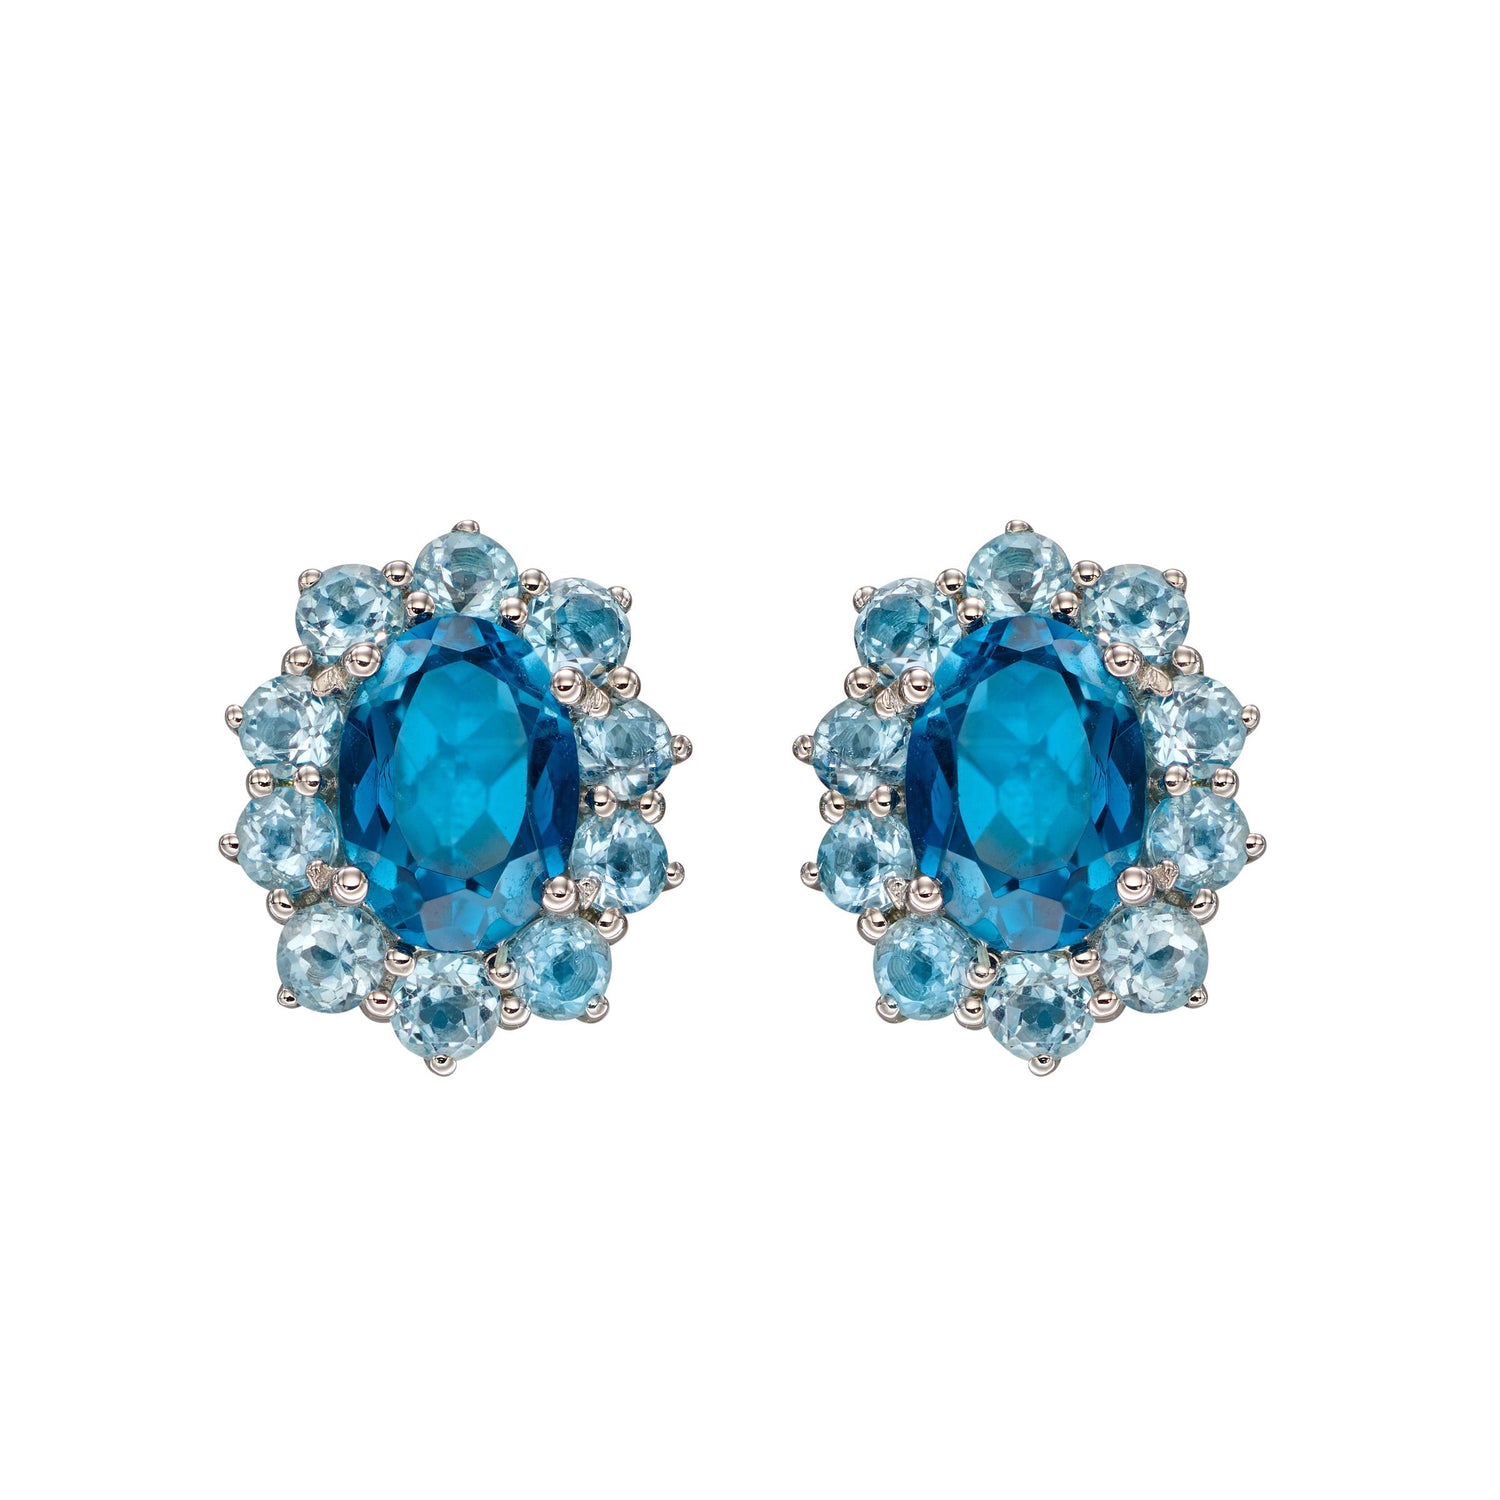 Statement Blue Topaz Stud Earrings in 9ct White Gold